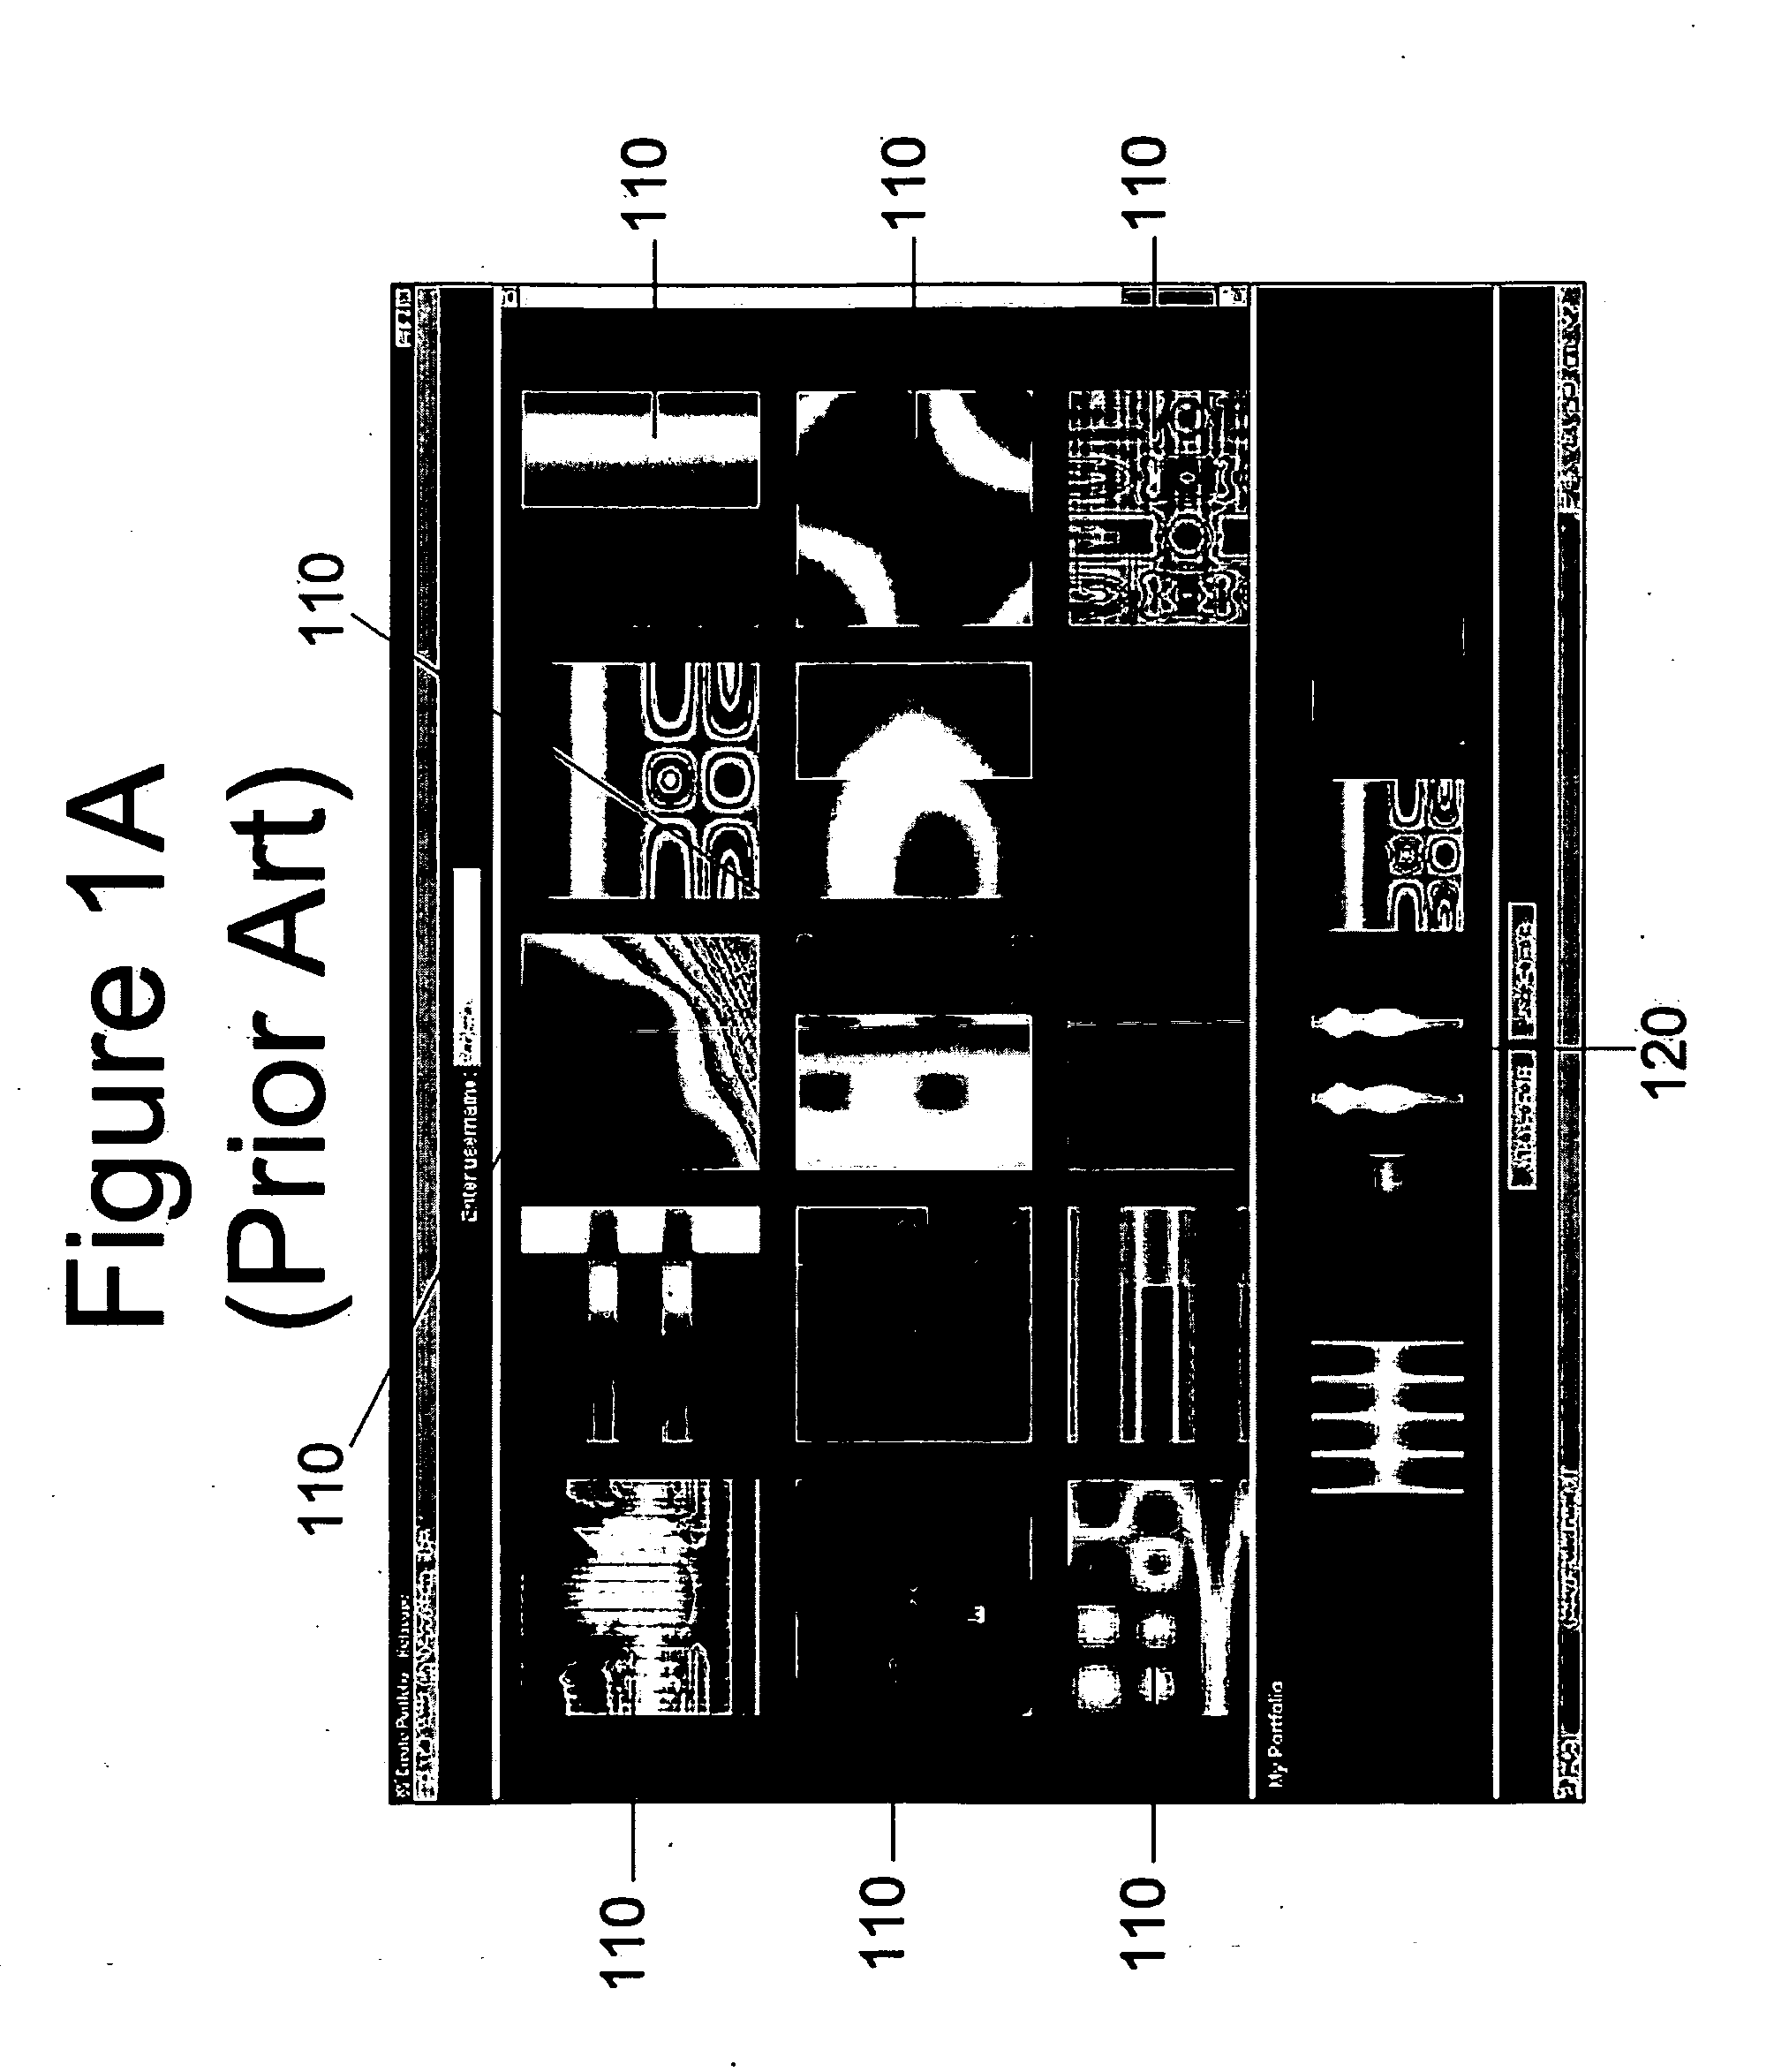 Graphical system and method for user authentication